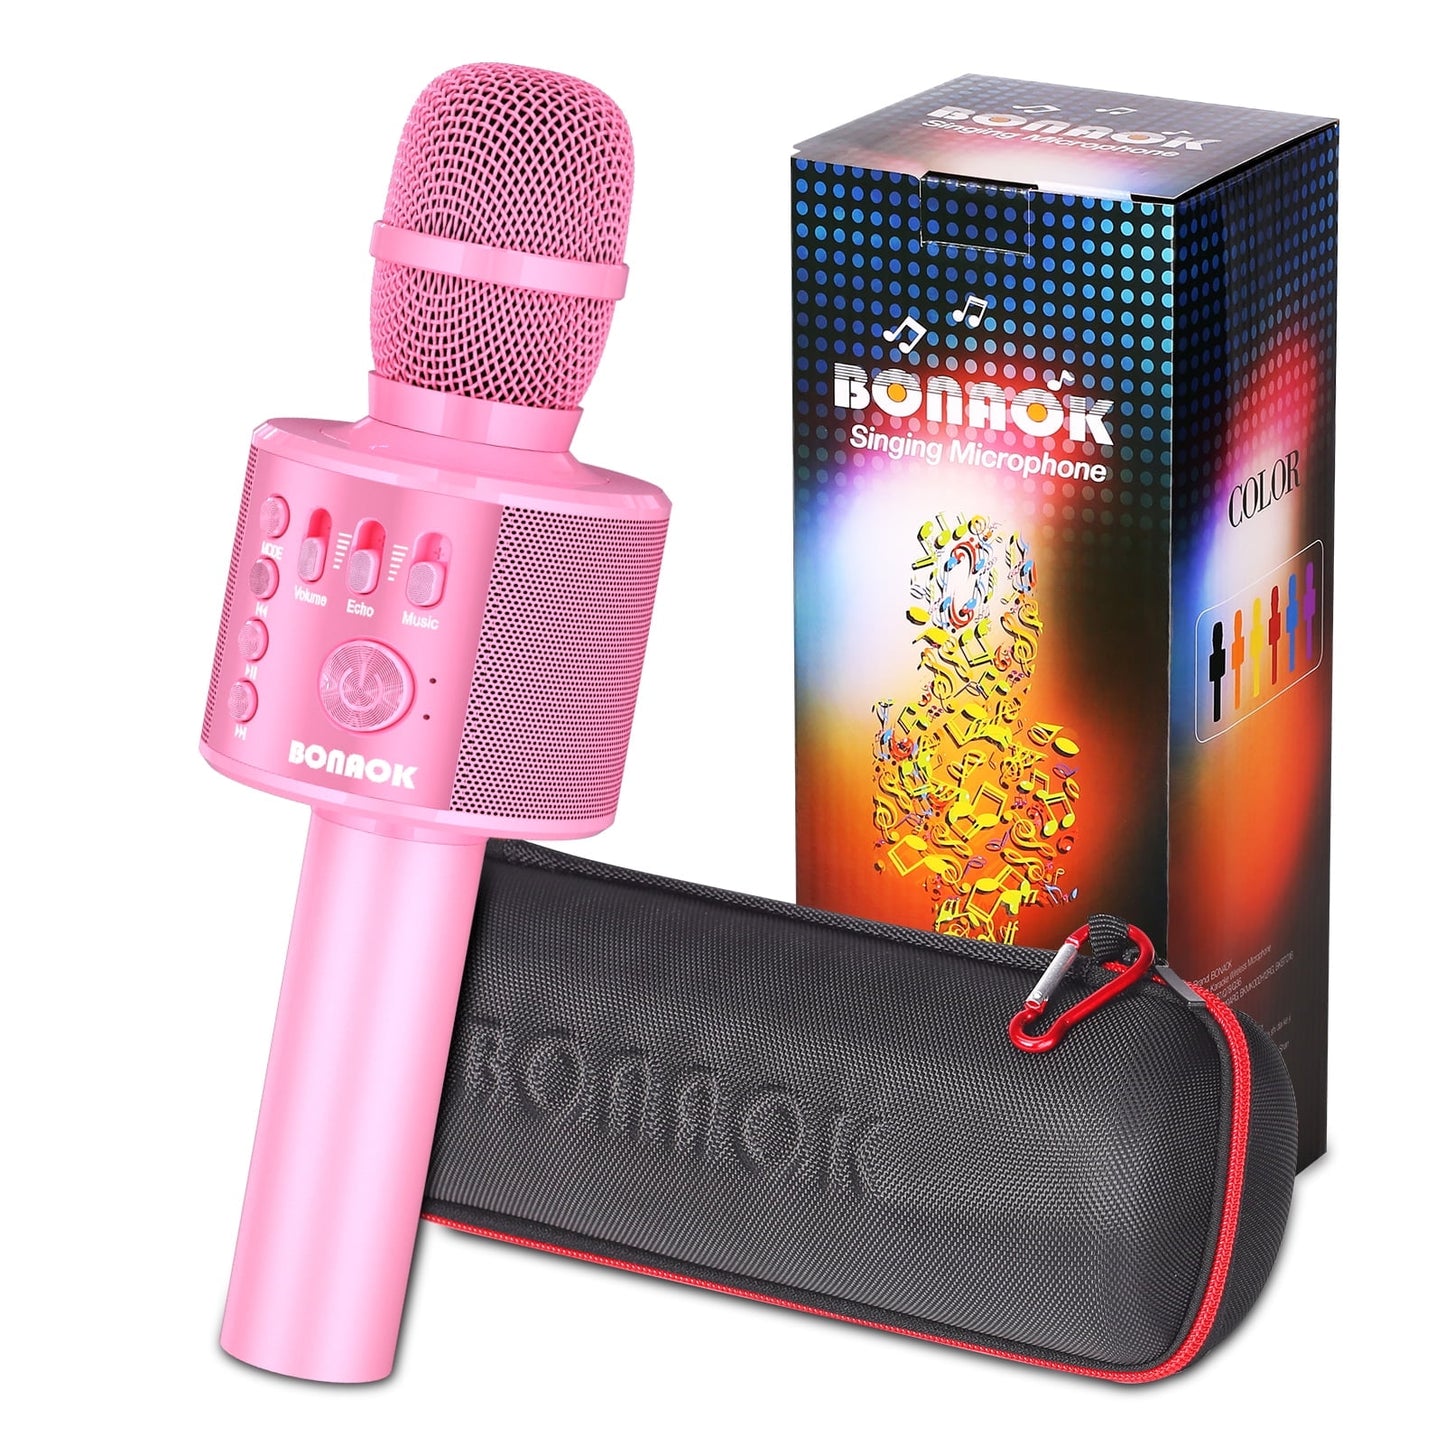 BONAOK Wireless Bluetooth Karaoke Microphone, 3-in-1 Portable Handheld Mic Speaker for All Smartphones,Gifts for Kids Adults Q37 (Rose Gold)